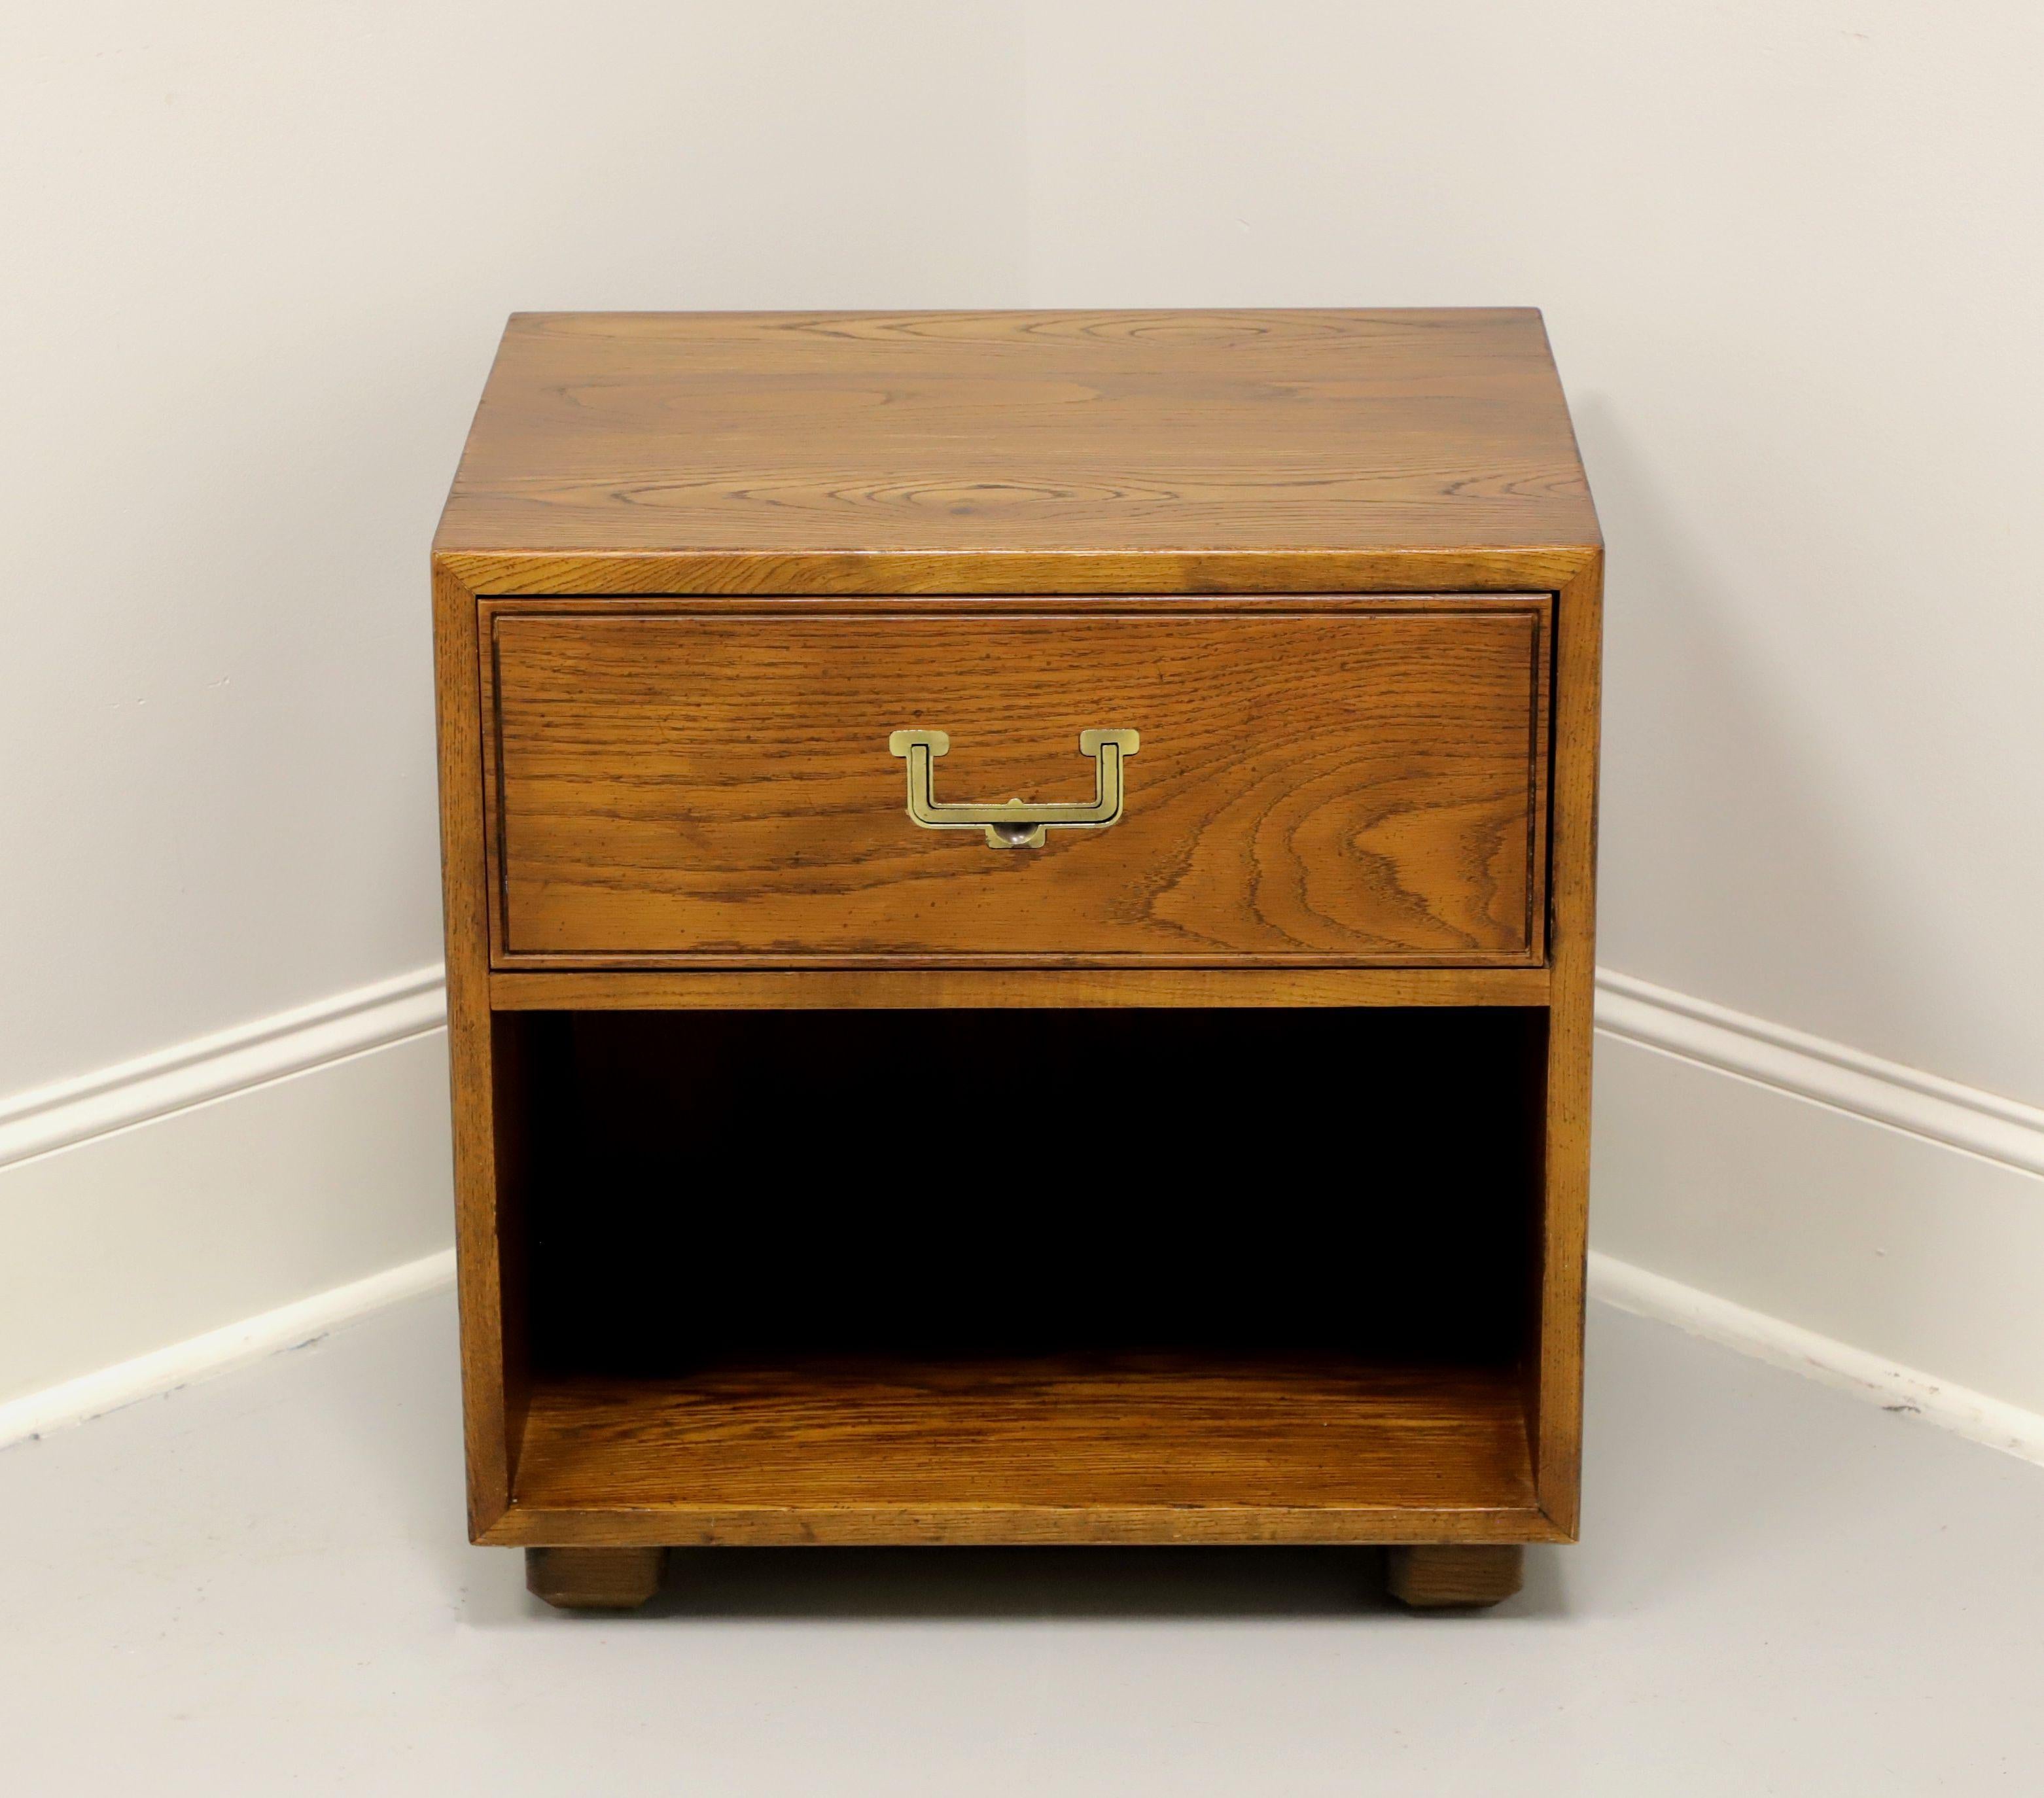 A Campaign style nightstand by Henredon, from their Artefacts Collection. Pecan, or similar nutwood, with brass hardware and block feet. Features one dovetail drawer above an open cabinet. Has a pre-drilled hole in the back for electrics. Made in